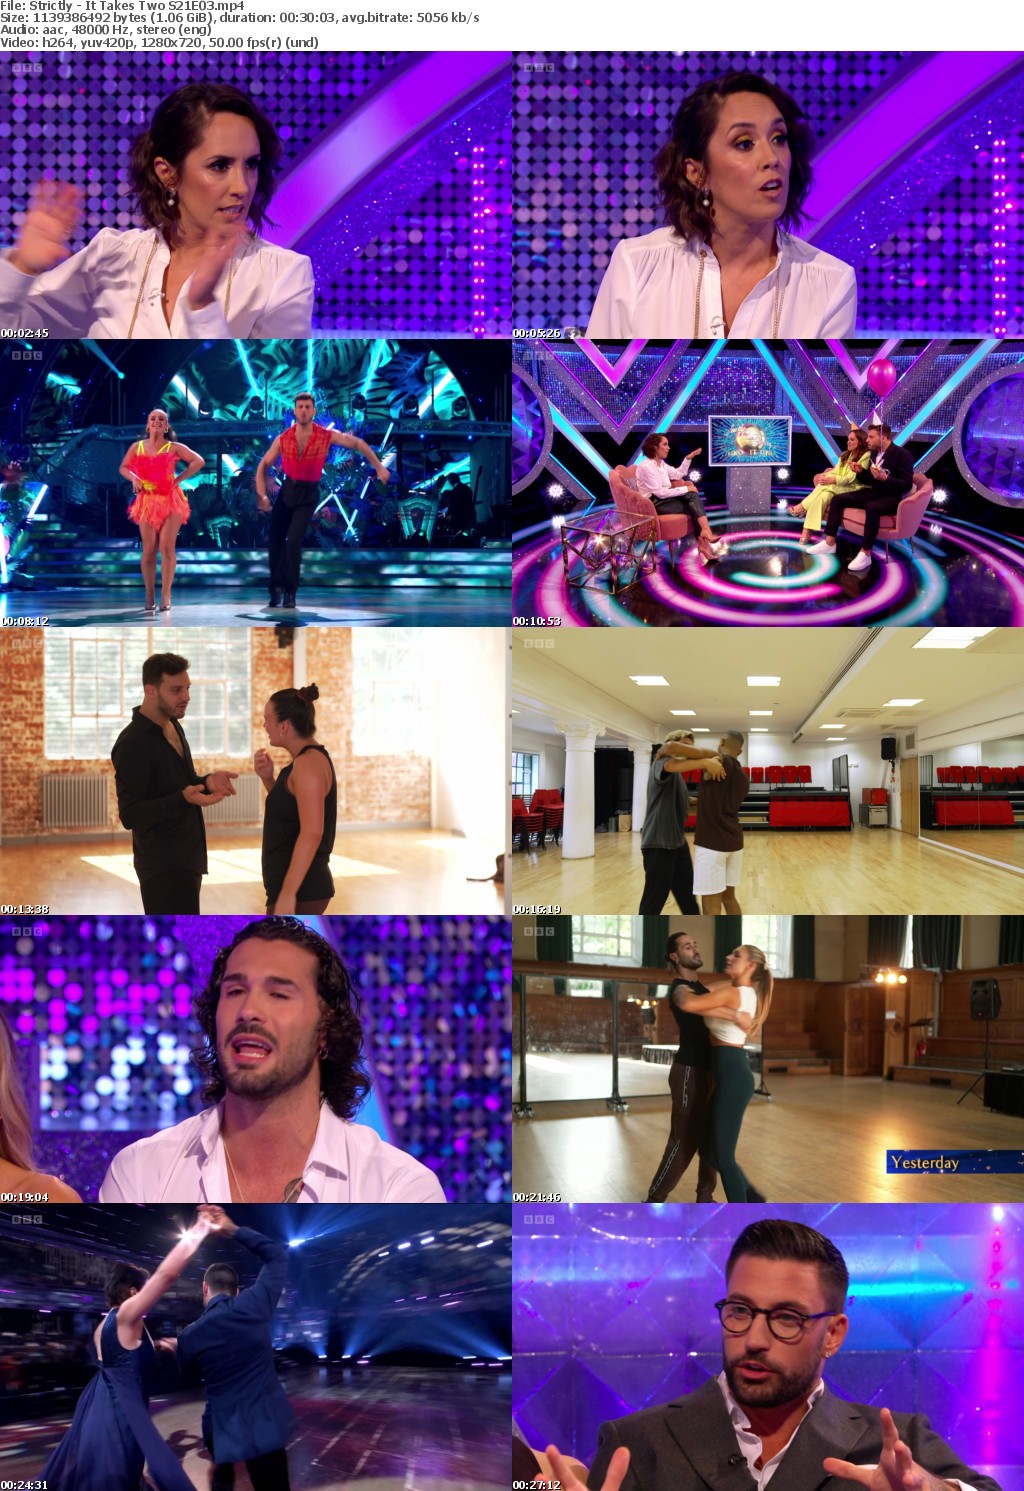 Strictly - It Takes Two S21E03 (1280x720p HD, 50fps, soft Eng subs)